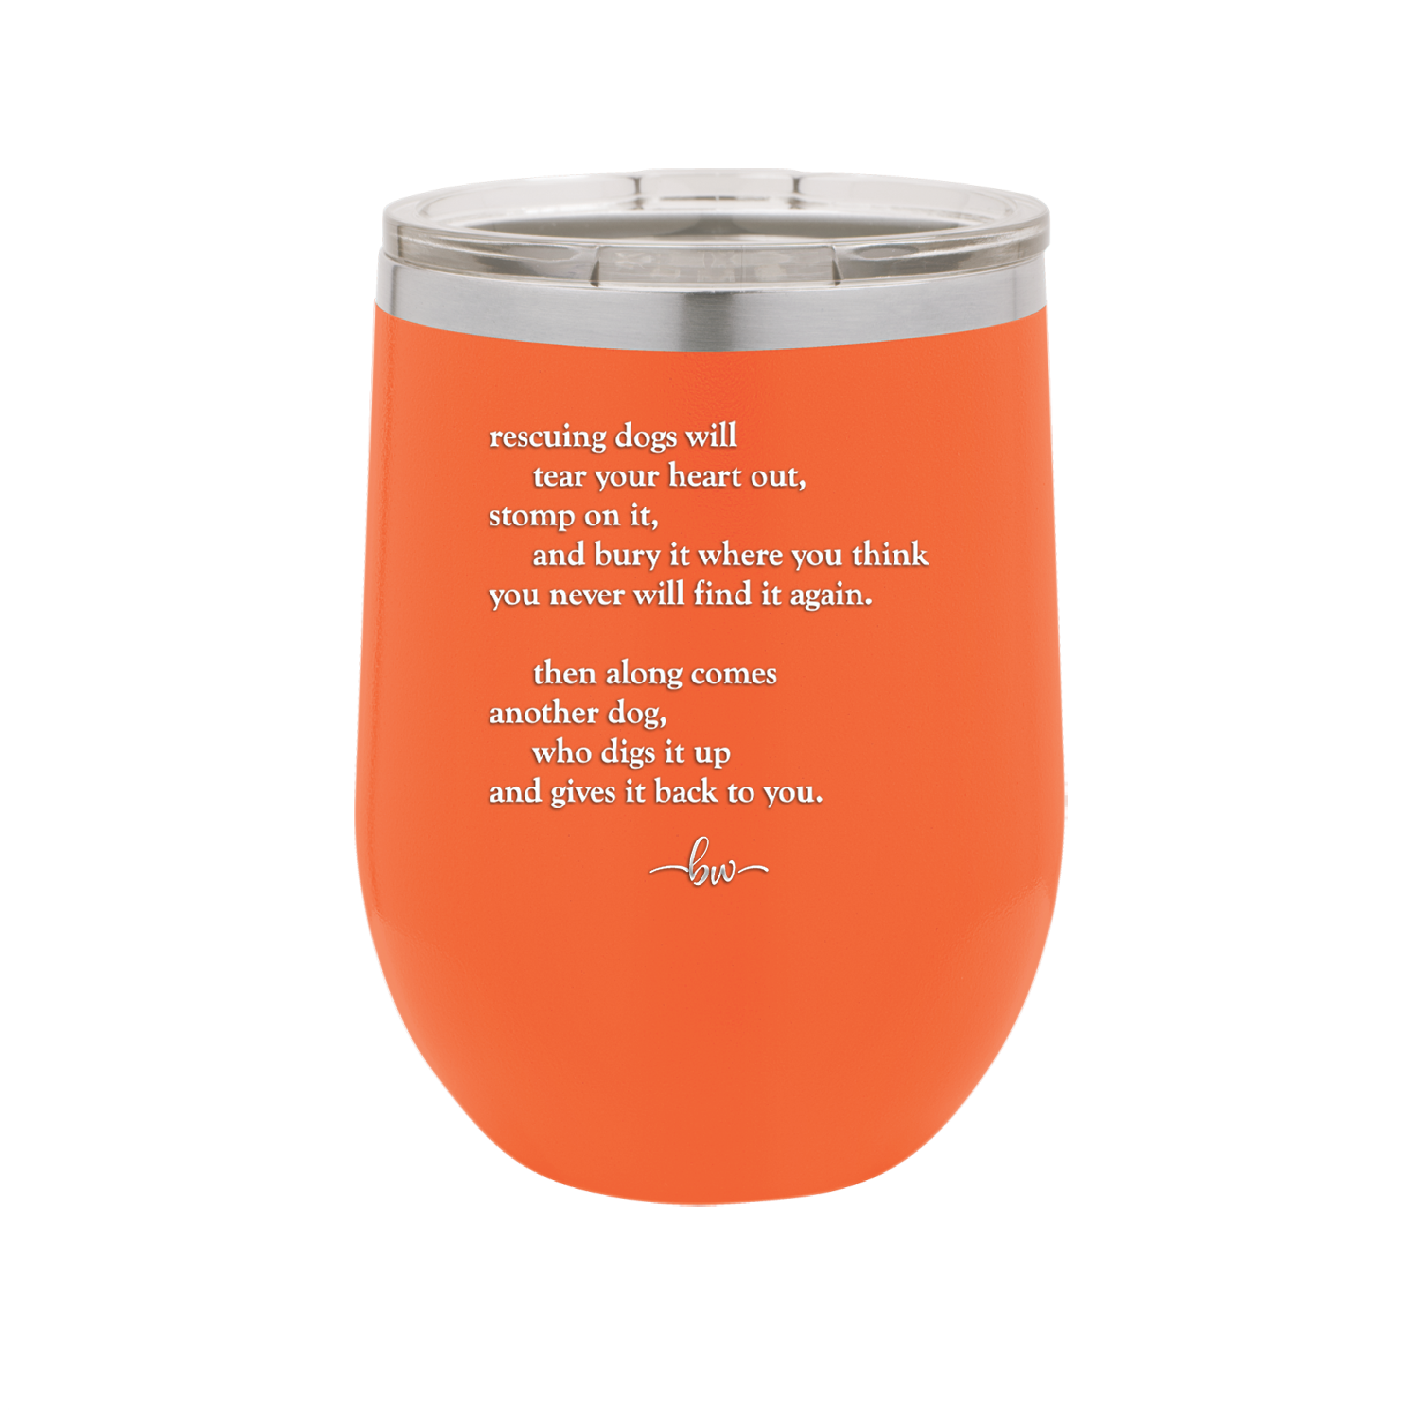 Rescuing Dogs Will Tear Your Heart Out - Laser Engraved Stainless Steel Drinkware - 1591 -